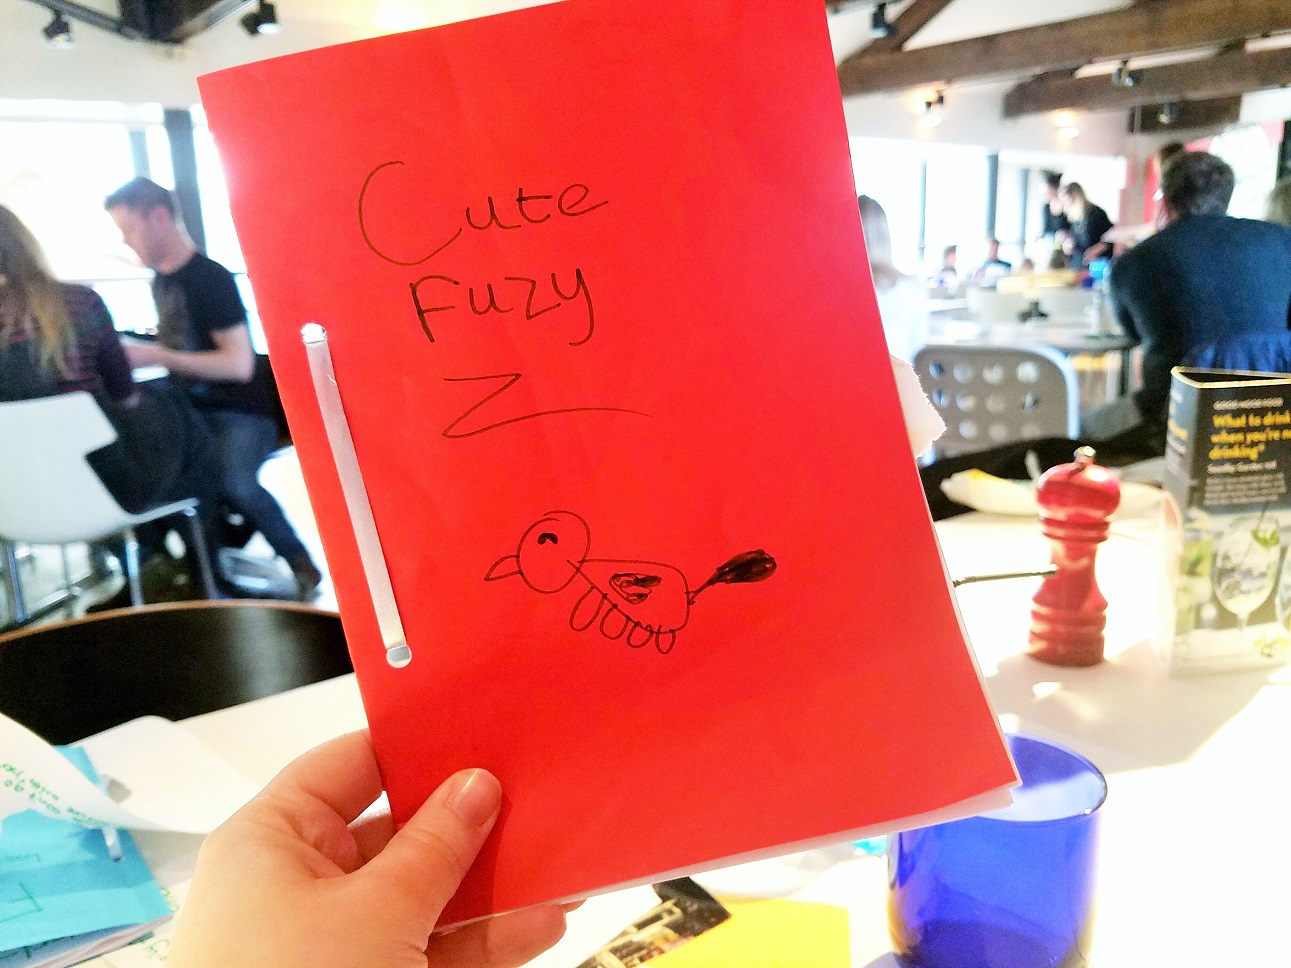 Cute Fuzzy the novel - a quick and easy way for children to write stories in conjunction with world book day